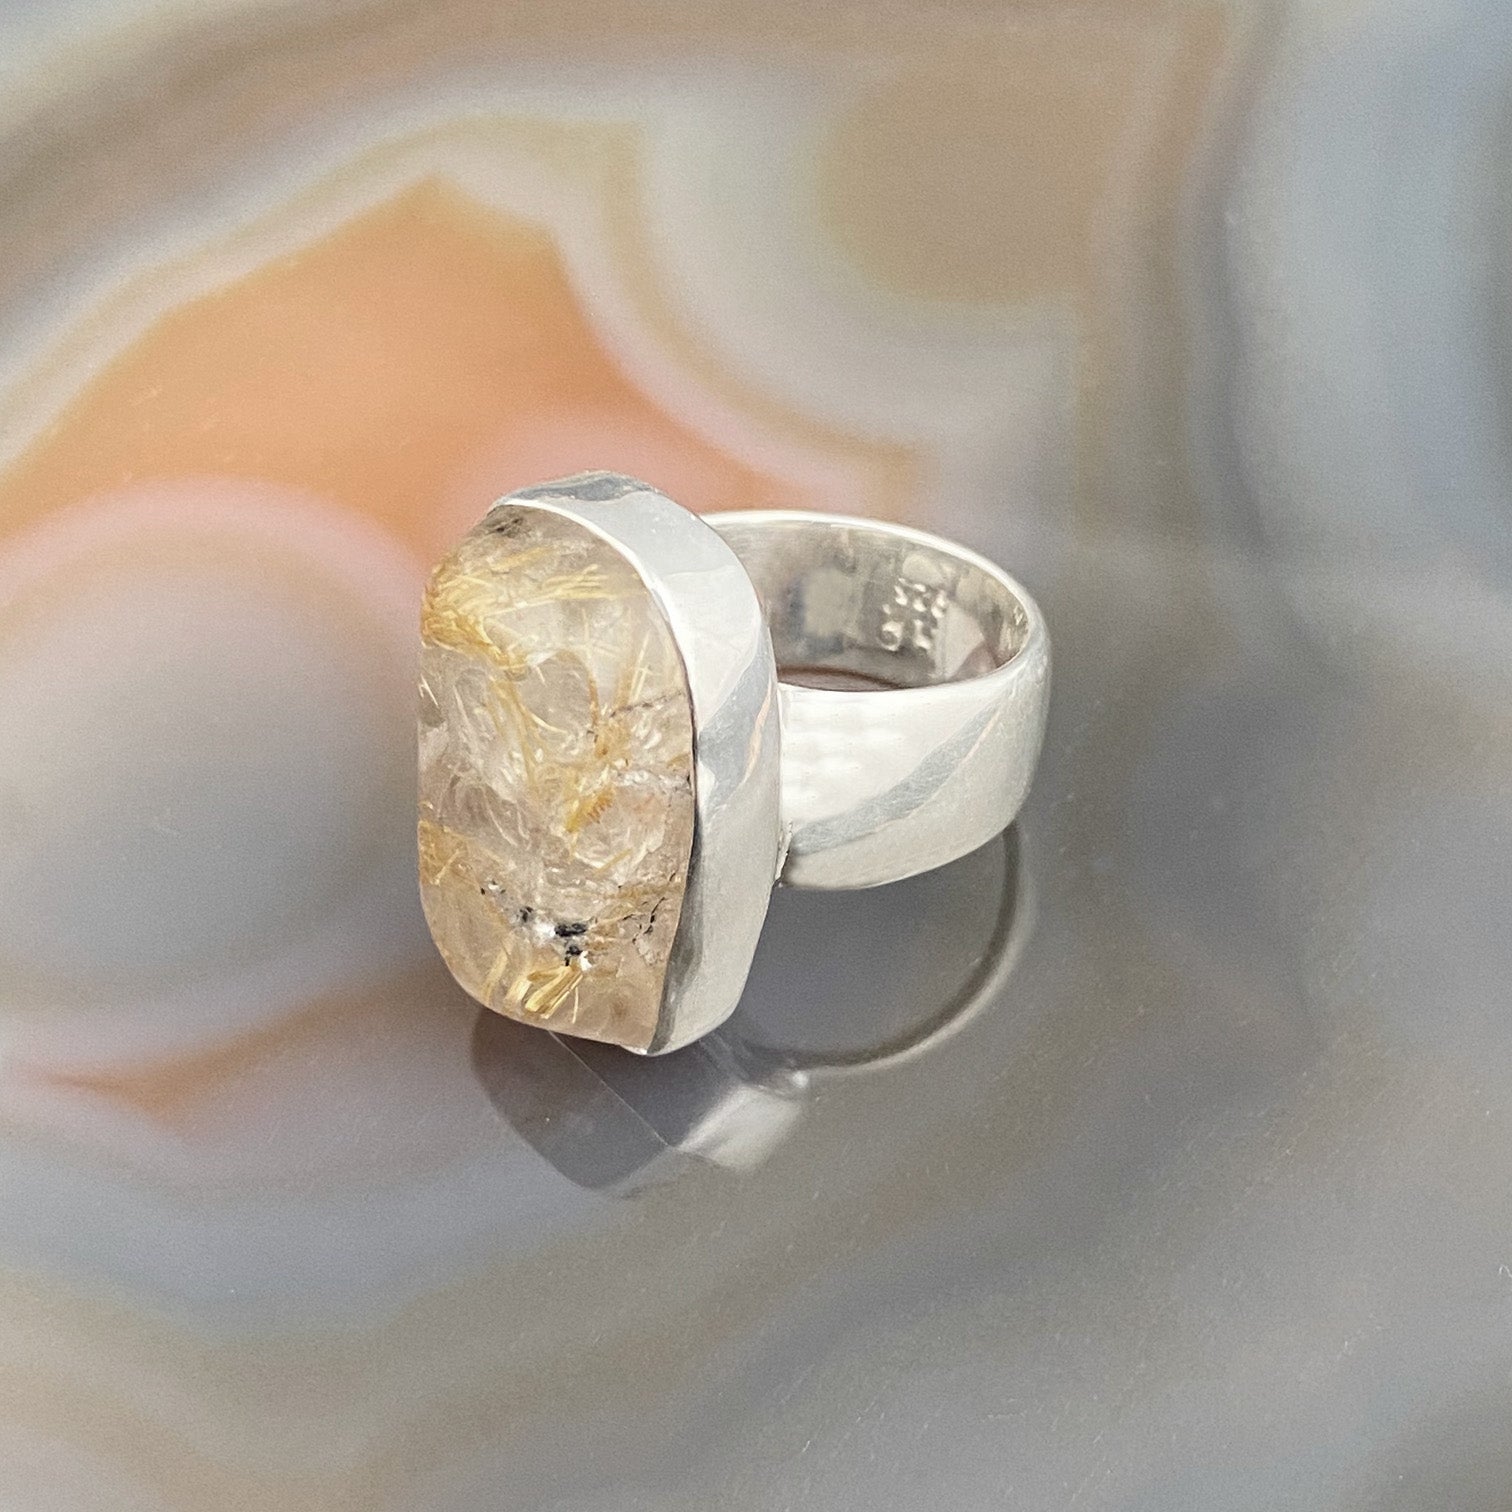 Gold Rutilated Quartz Sterling Silver Ring with Divine Feminine Symbol size 5